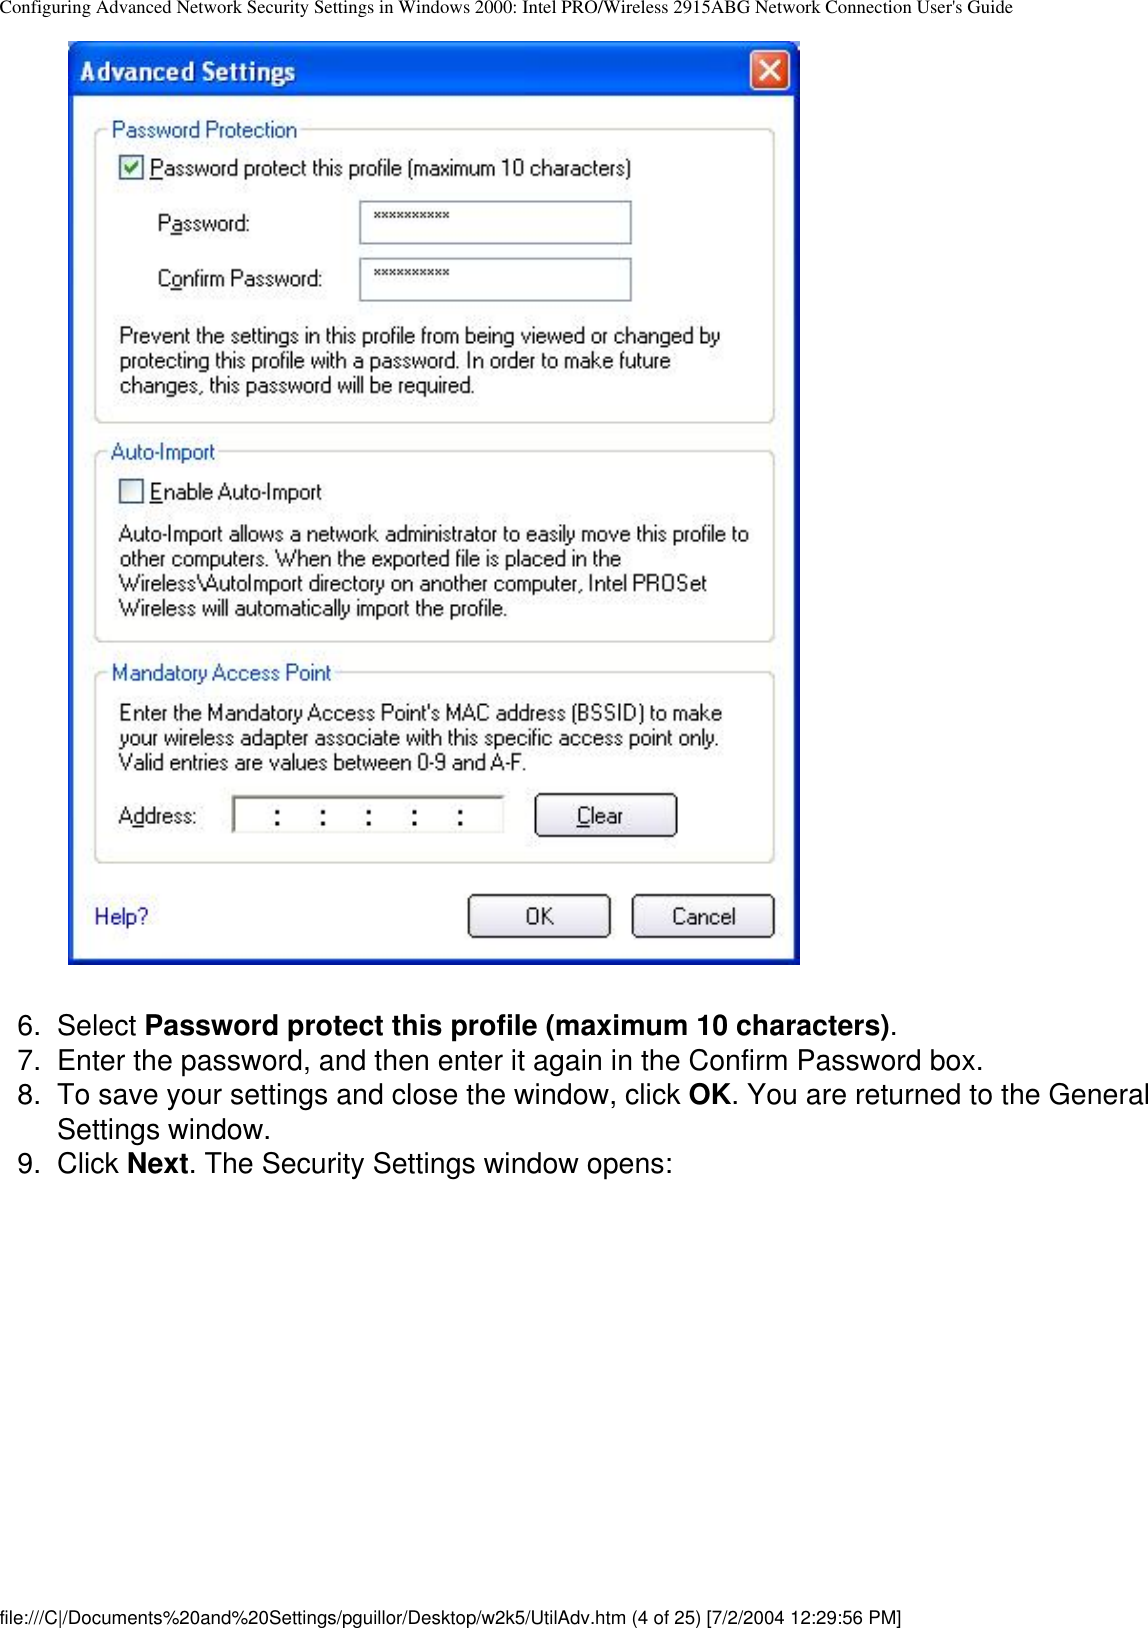 Configuring Advanced Network Security Settings in Windows 2000: Intel PRO/Wireless 2915ABG Network Connection User&apos;s Guide           6.  Select Password protect this profile (maximum 10 characters).7.  Enter the password, and then enter it again in the Confirm Password box. 8.  To save your settings and close the window, click OK. You are returned to the General Settings window.9.  Click Next. The Security Settings window opens:file:///C|/Documents%20and%20Settings/pguillor/Desktop/w2k5/UtilAdv.htm (4 of 25) [7/2/2004 12:29:56 PM]